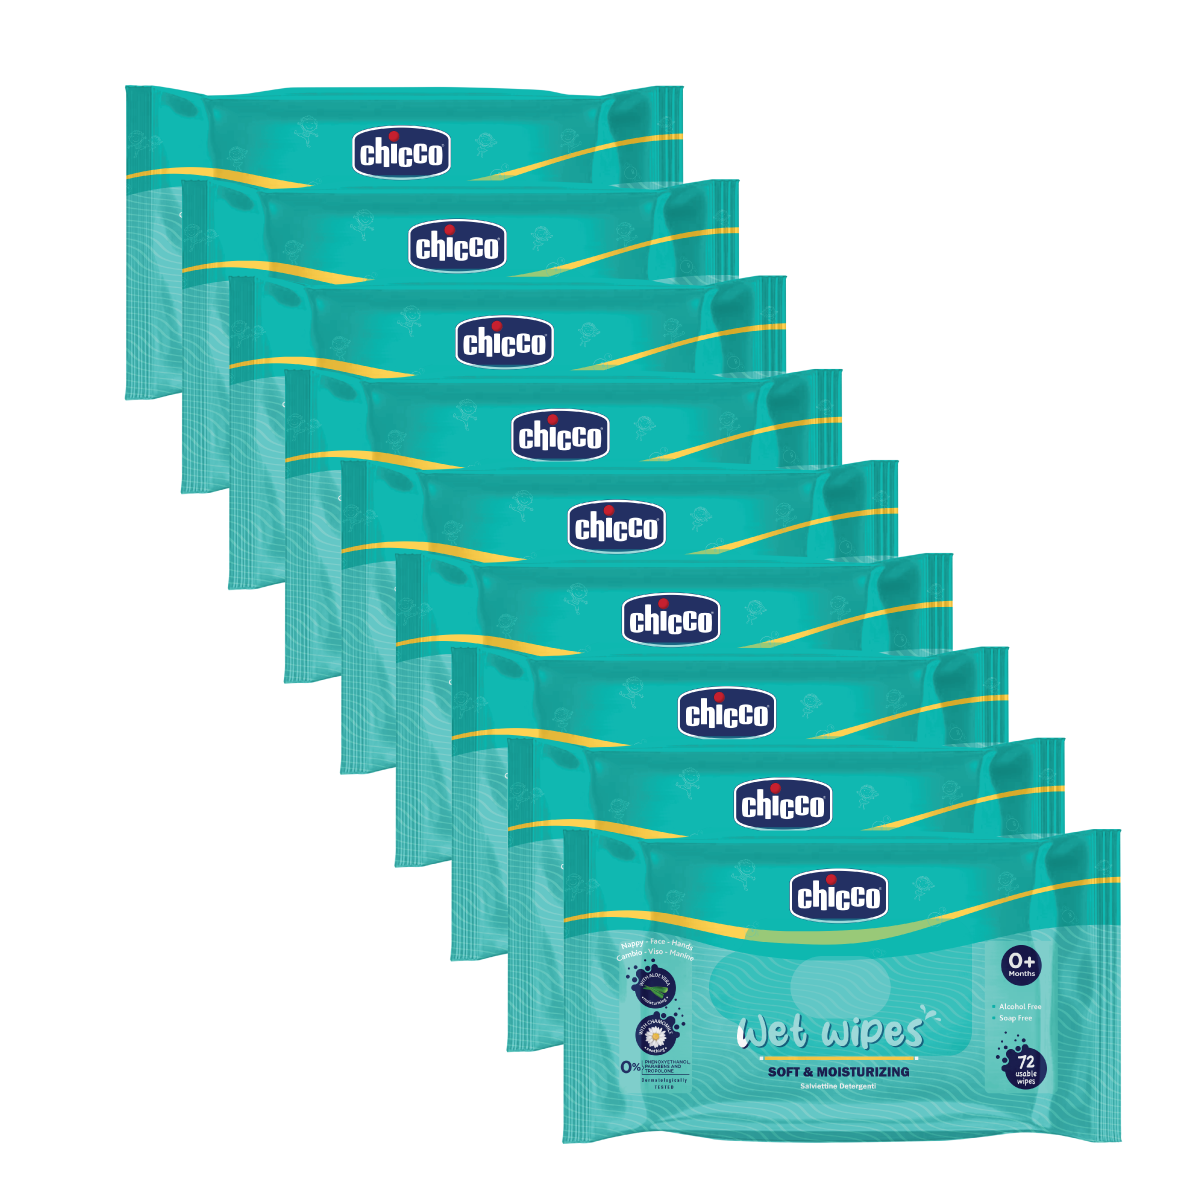 Chicco Wetwipes Pack of 3-648 PCS